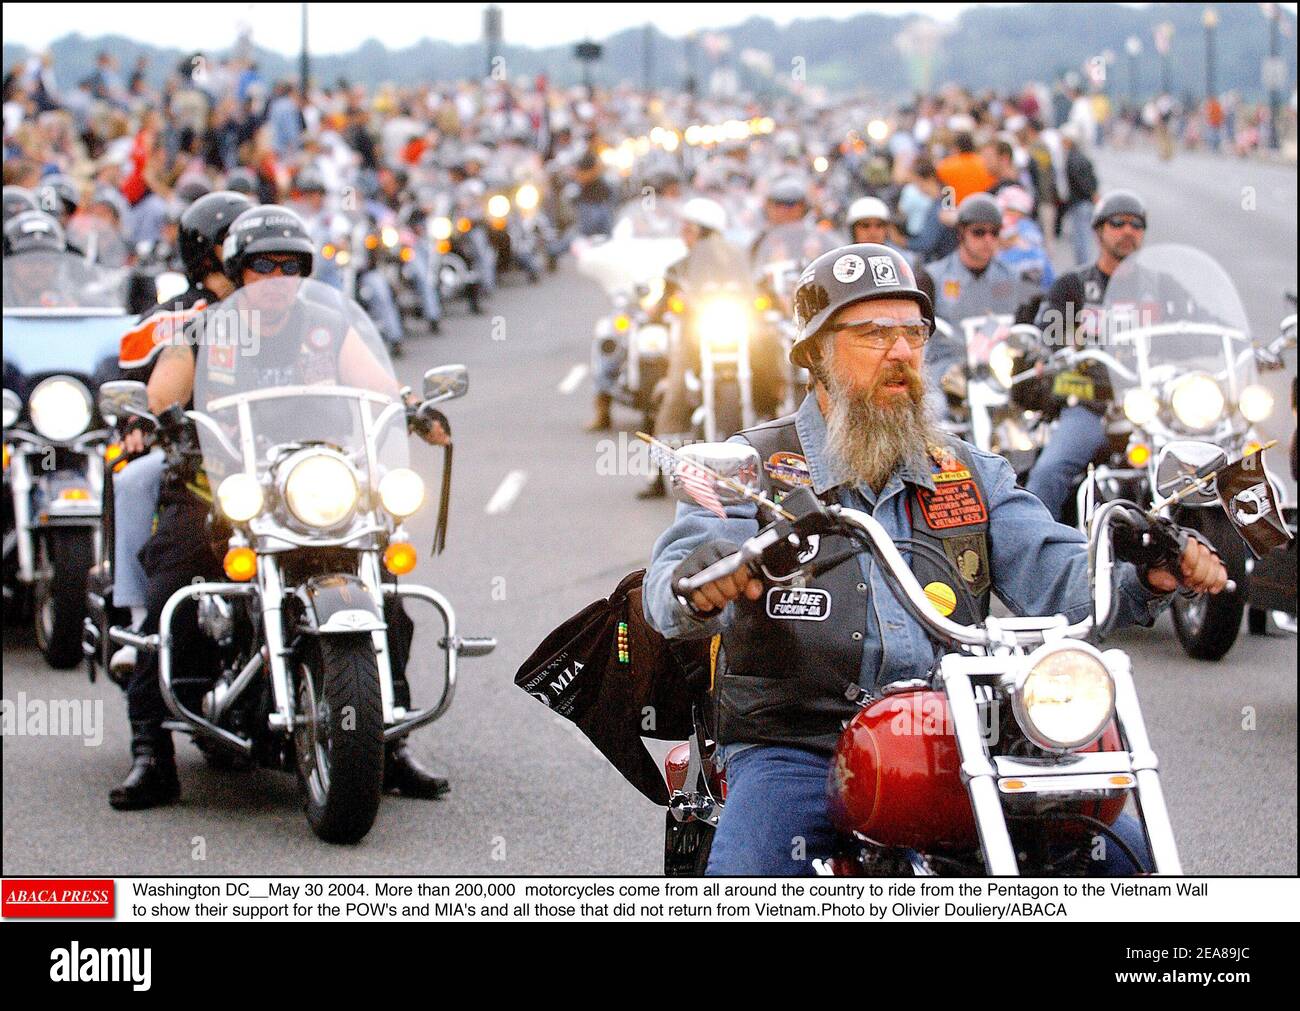 Washington DC  May 30 2004. More than 200,000 motorcycles come from all around the country to ride from the Pentagon to the Vietnam Wall to show their support for the POW's and MIA's and all those that did not return from Vietnam. Photo by Olivier Douliery/ABACA Stock Photo